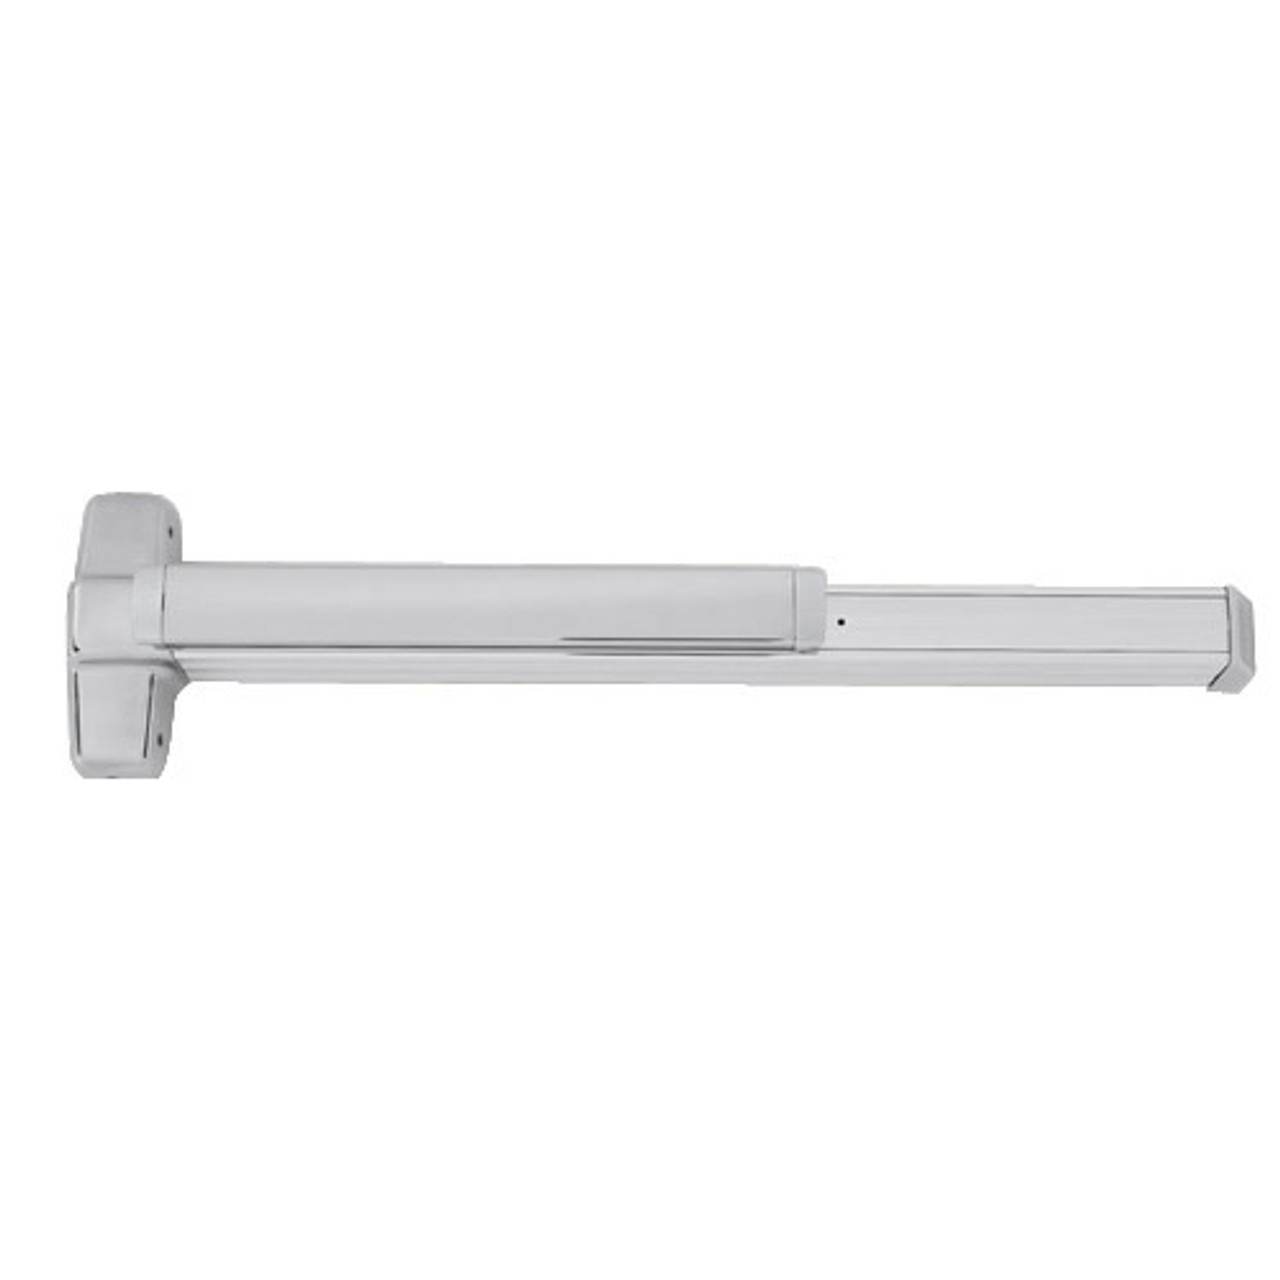 QEL-9850WDC-EO-US32D-4 Von Duprin Exit Device in Satin Stainless